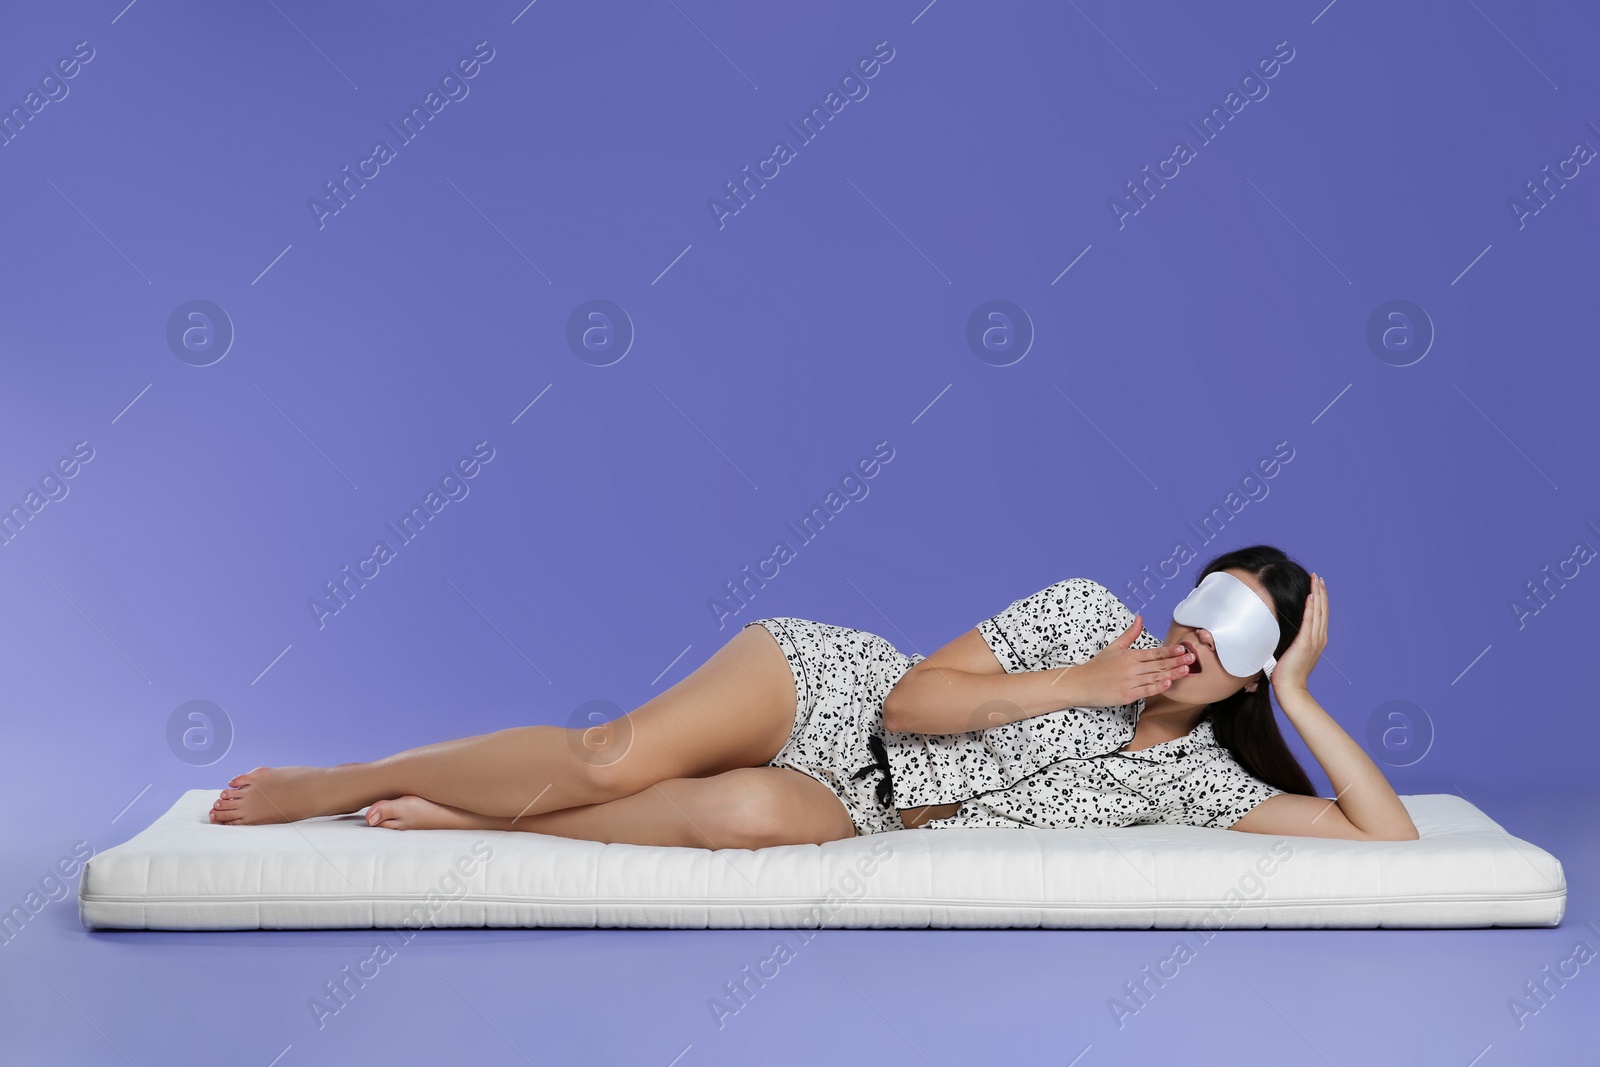 Photo of Woman with sleep mask lying on soft mattress against light purple background